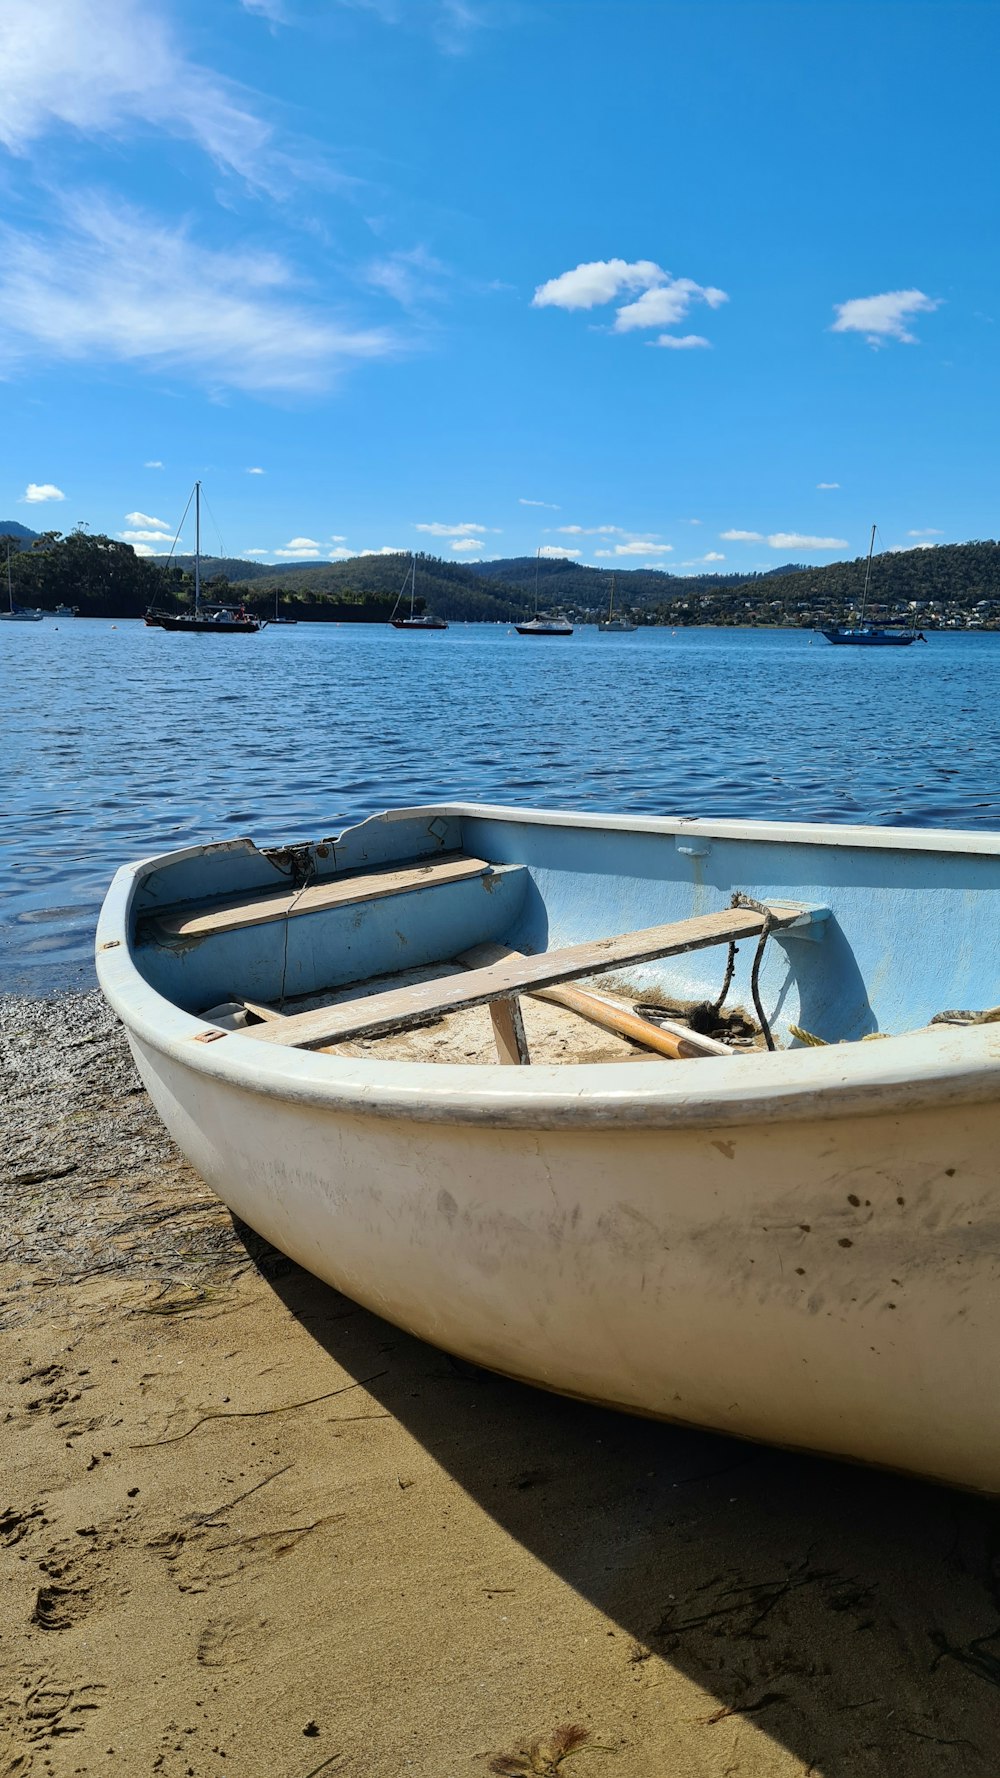 white and brown boat on beach during daytime